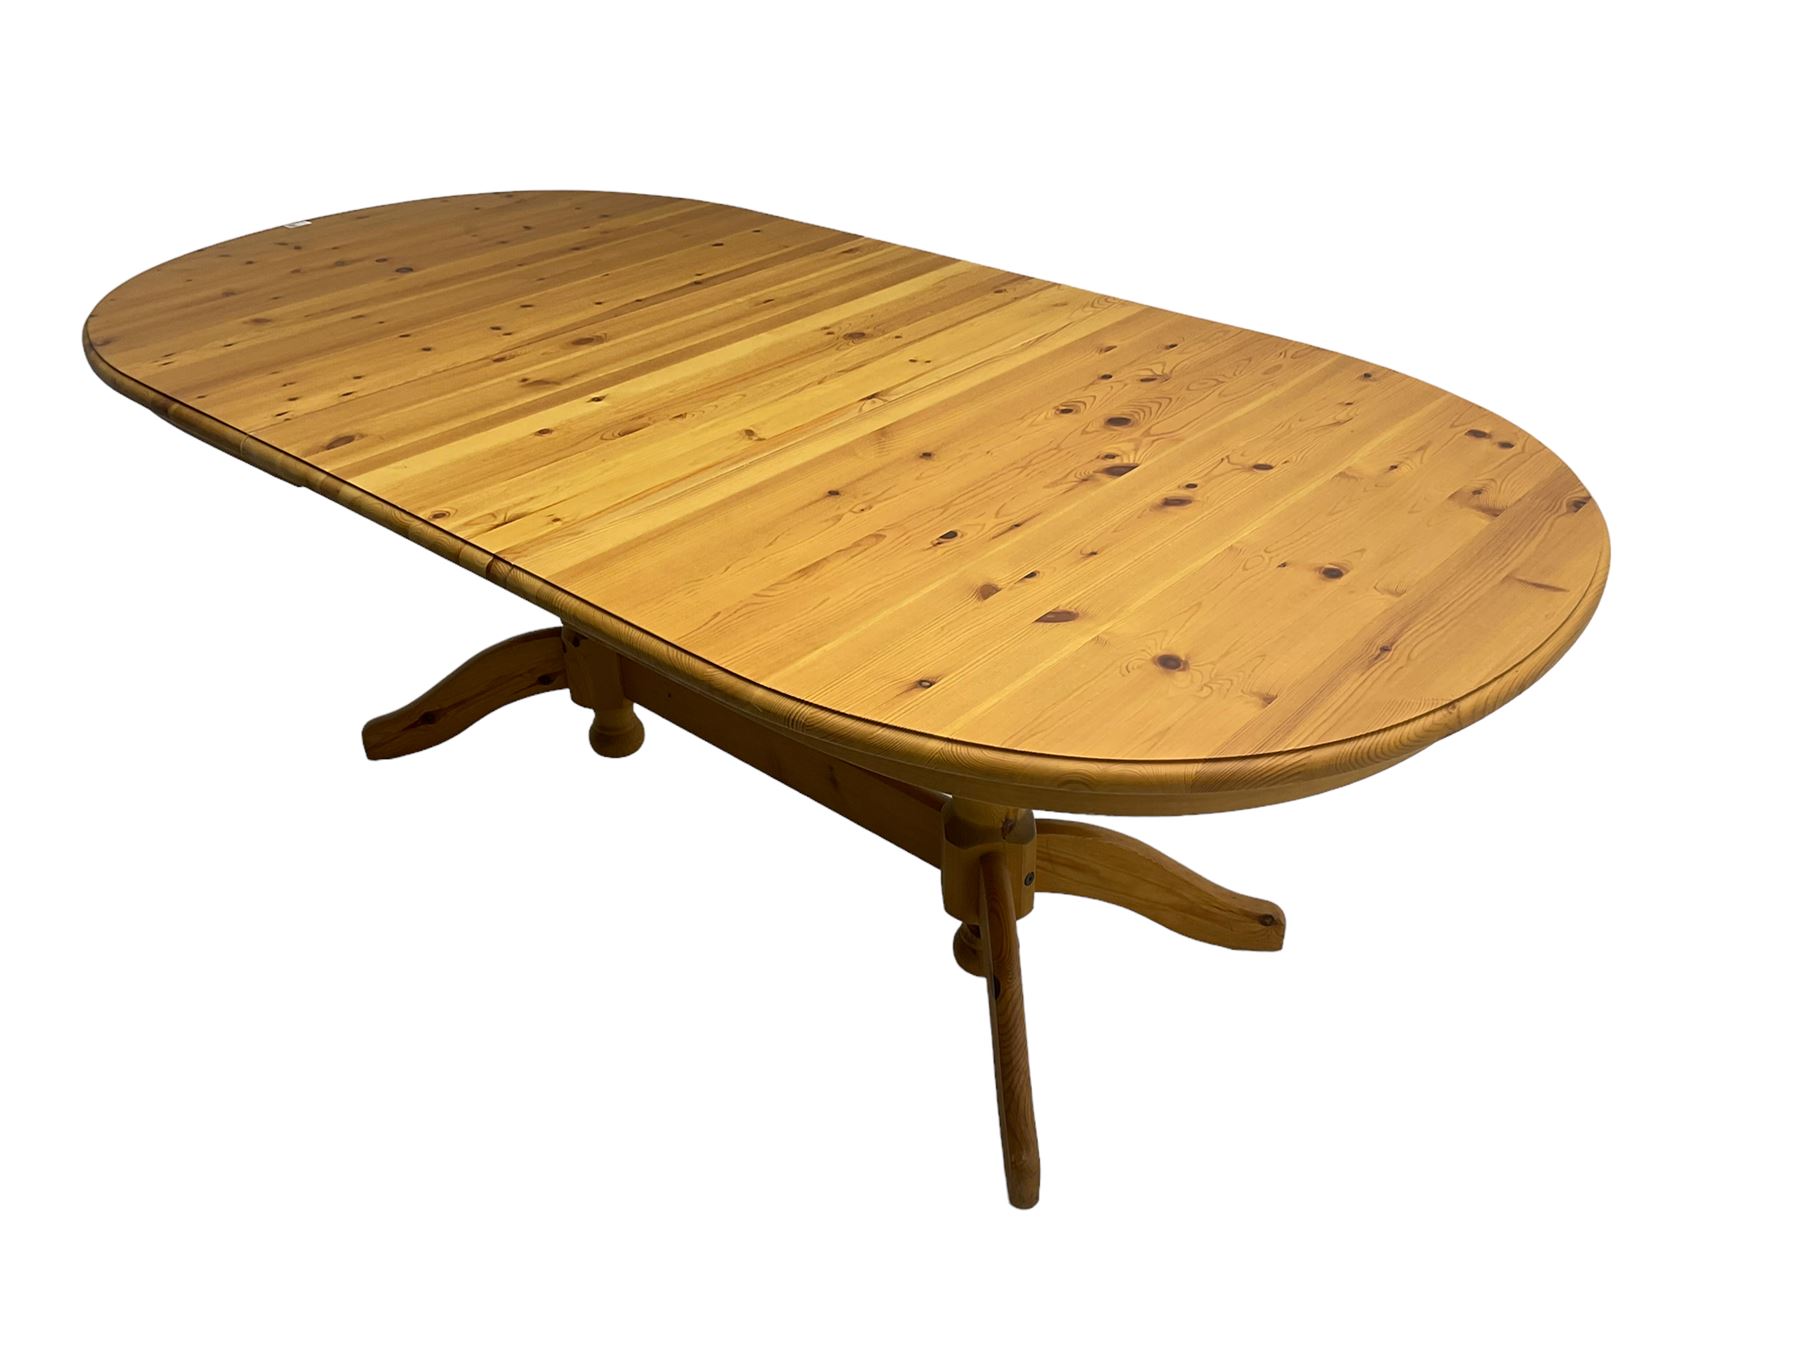 Pine extending dining table with additional leaf - Image 4 of 7